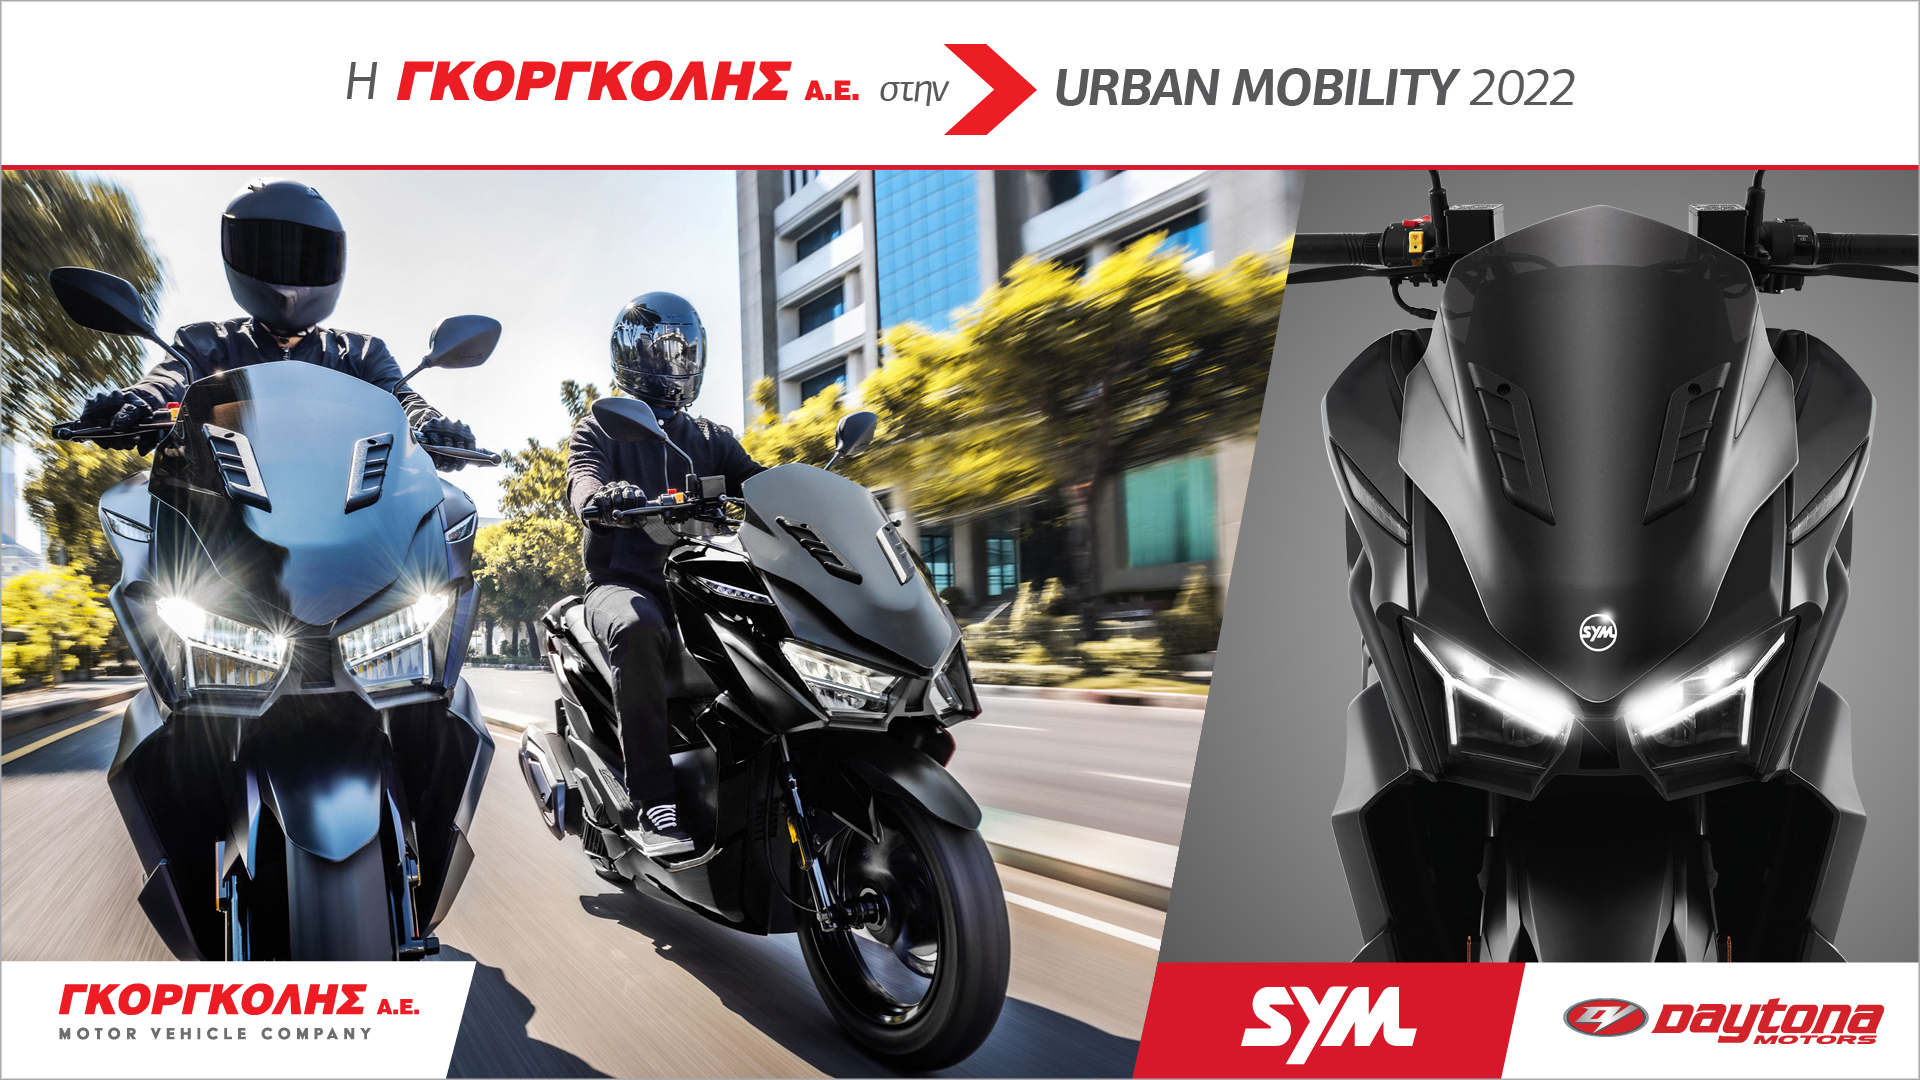 You are currently viewing Η Γκοργκόλης Α.Ε. στην “Urban Mobility 2022”